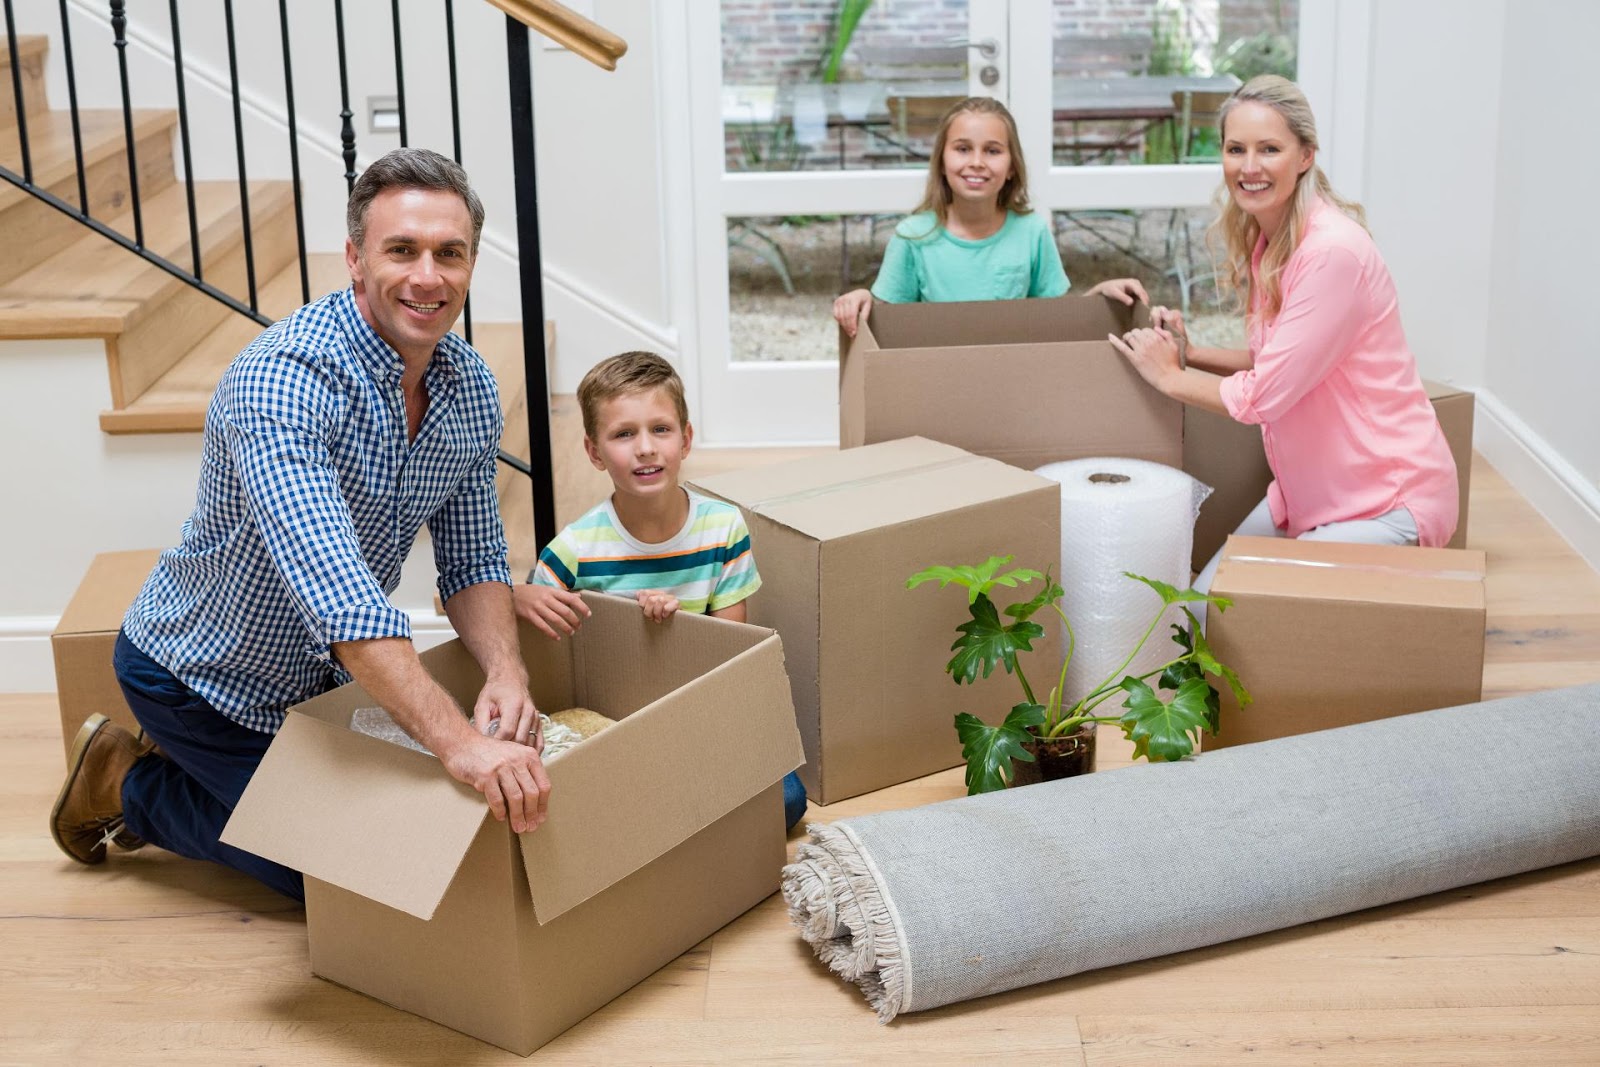 Packing to move? Let us guide you!